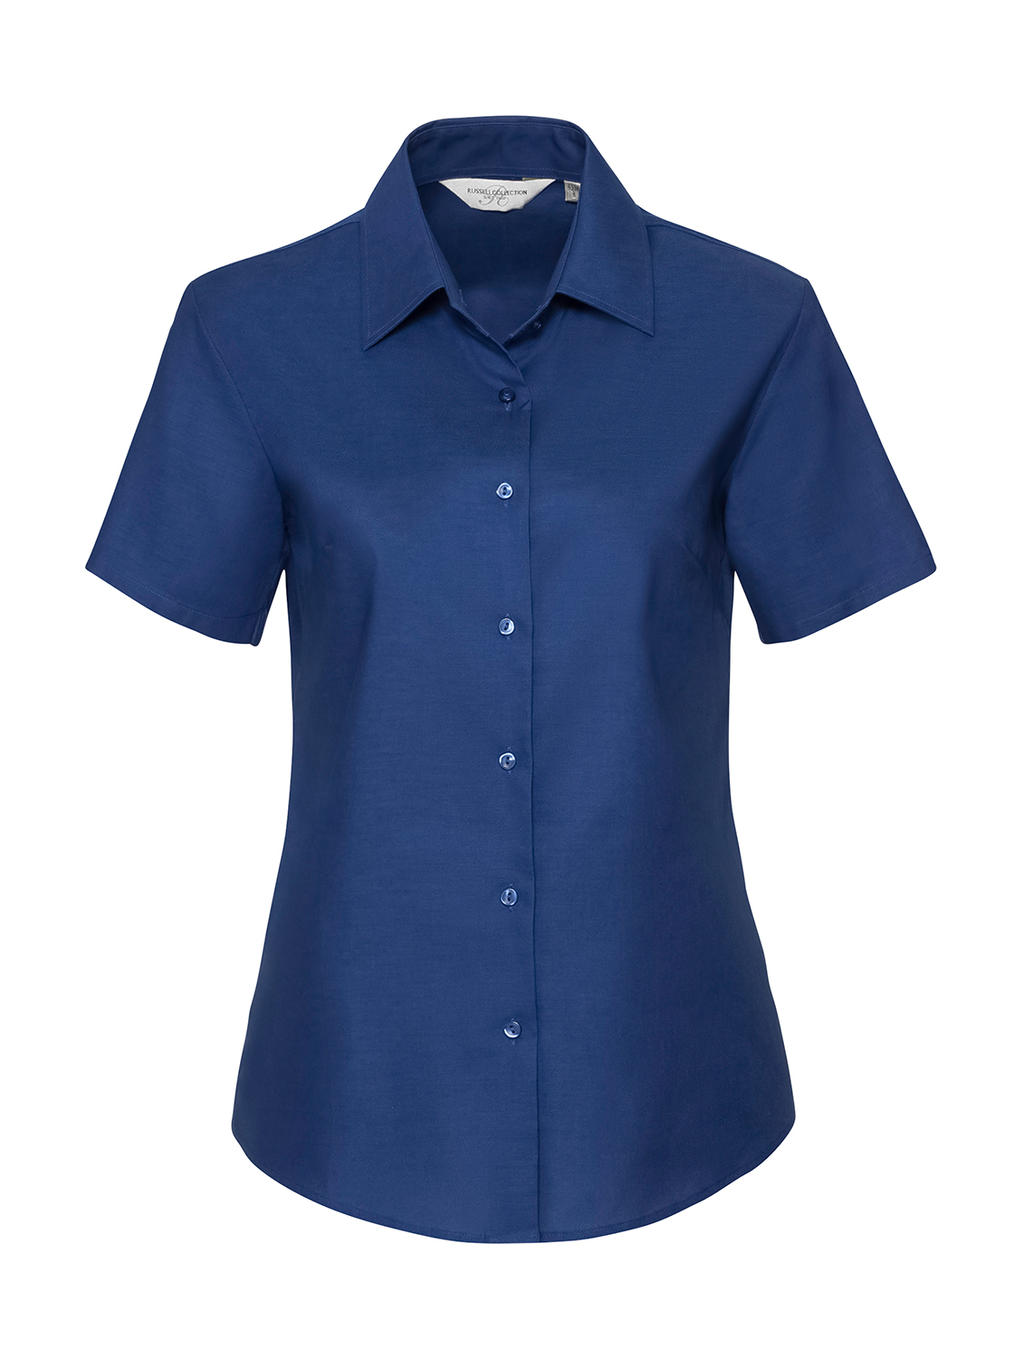  Ladies Classic Oxford Shirt in Farbe Bright Royal